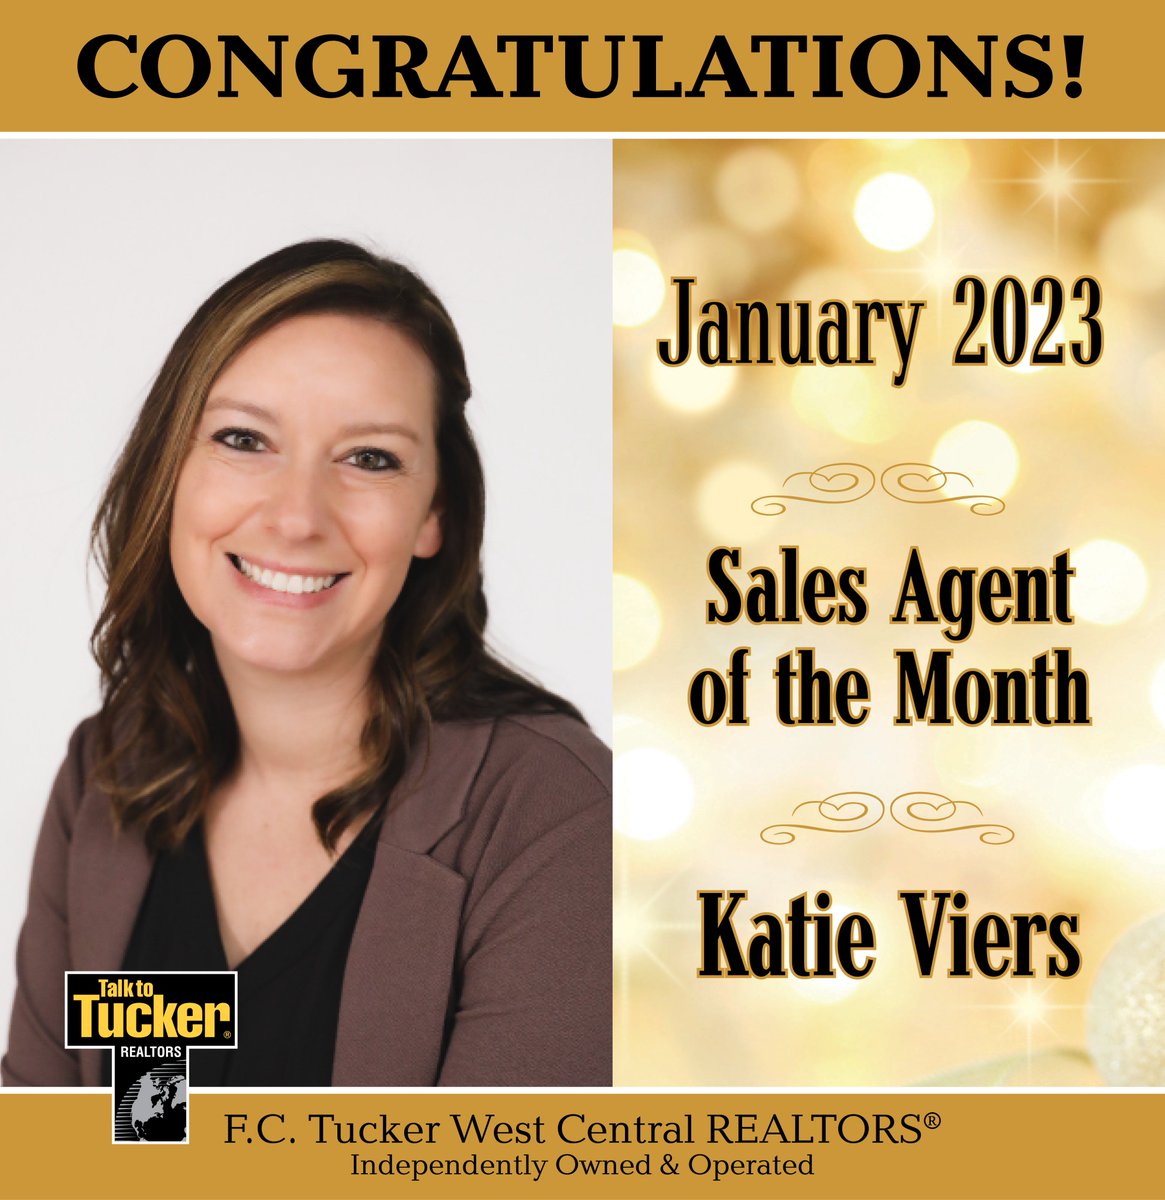 Kicking off 2023 strong is... Katie Viers! Congrats on earning Sales Agent of the Month, Katie! #LetsTalk #TalkToTucker #Realtor #RealEstate #Moving #CrawfordsvilleHomes #MoCoHomes #CrawfordsvilleRealtor #MoCoRealtor  #DreamHome #NewHome #TopAgent #AgentOfTheMonth #MoCoRealEstate